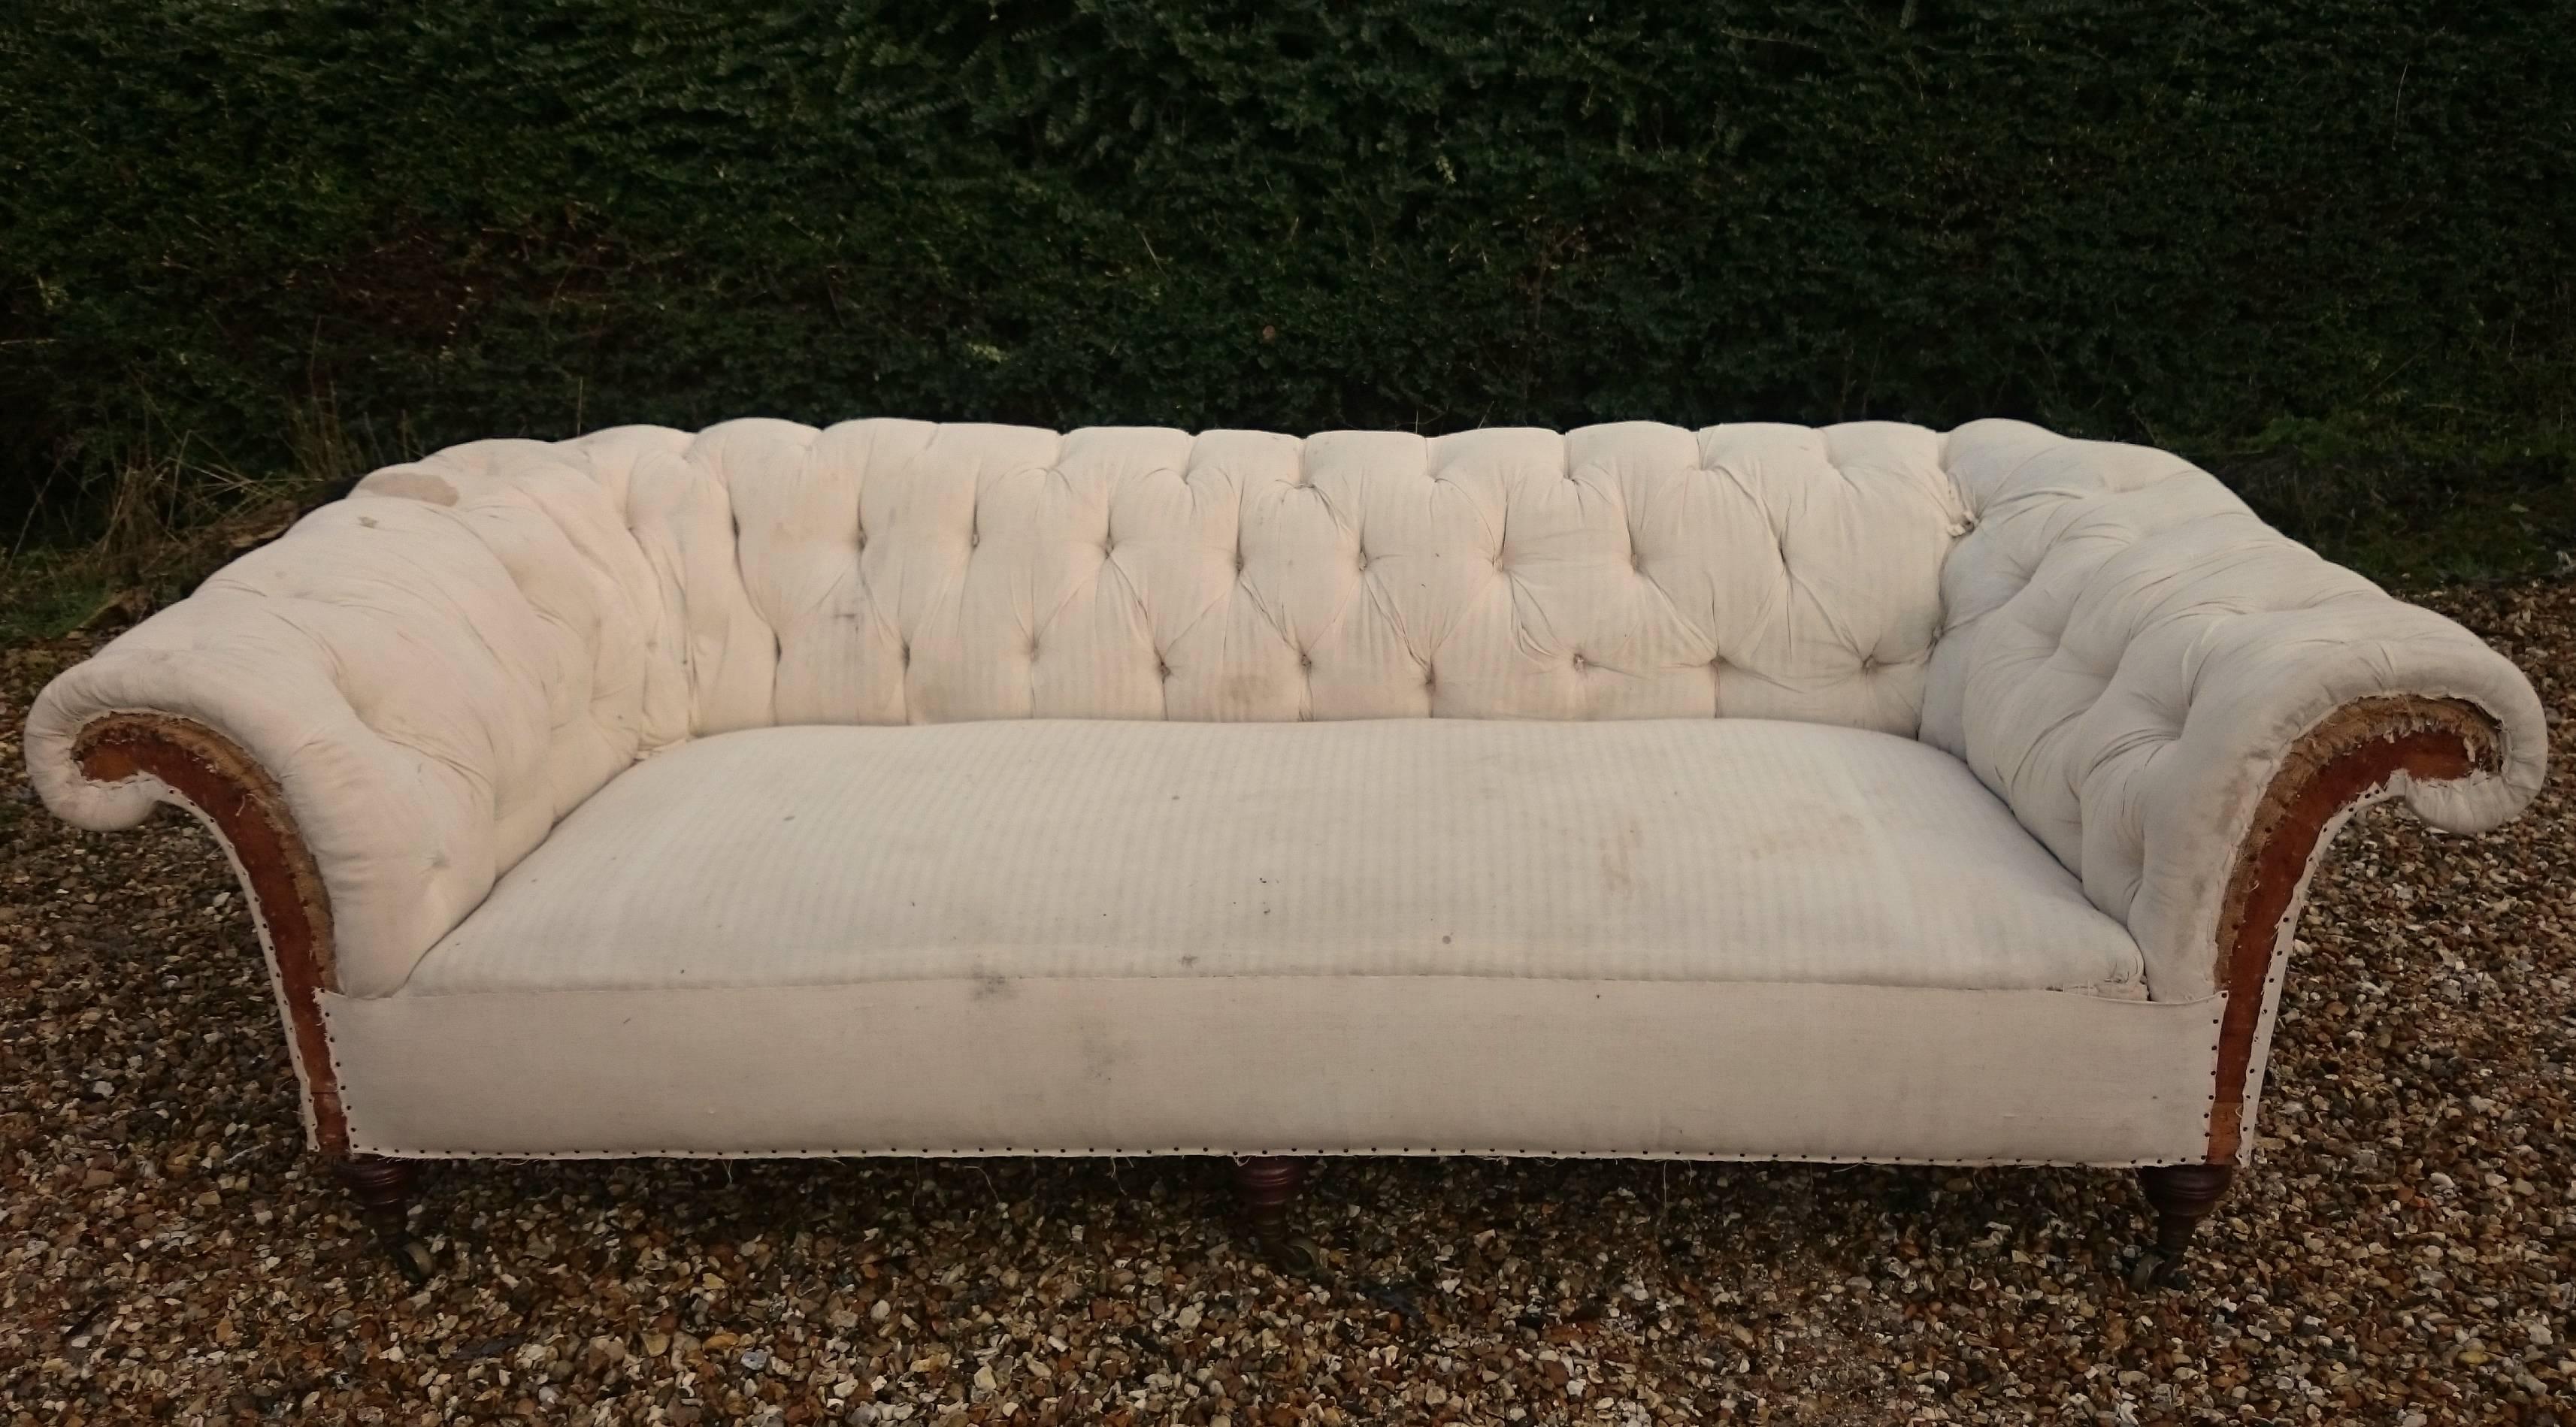 Absolutely massive Howard and Sons Chesterfield sofa with three turned Howard legs on the front and unusually with three frame legs on the back. The stamp on the caster would indicate the sofa was made before 1890, and judging by the overall shape